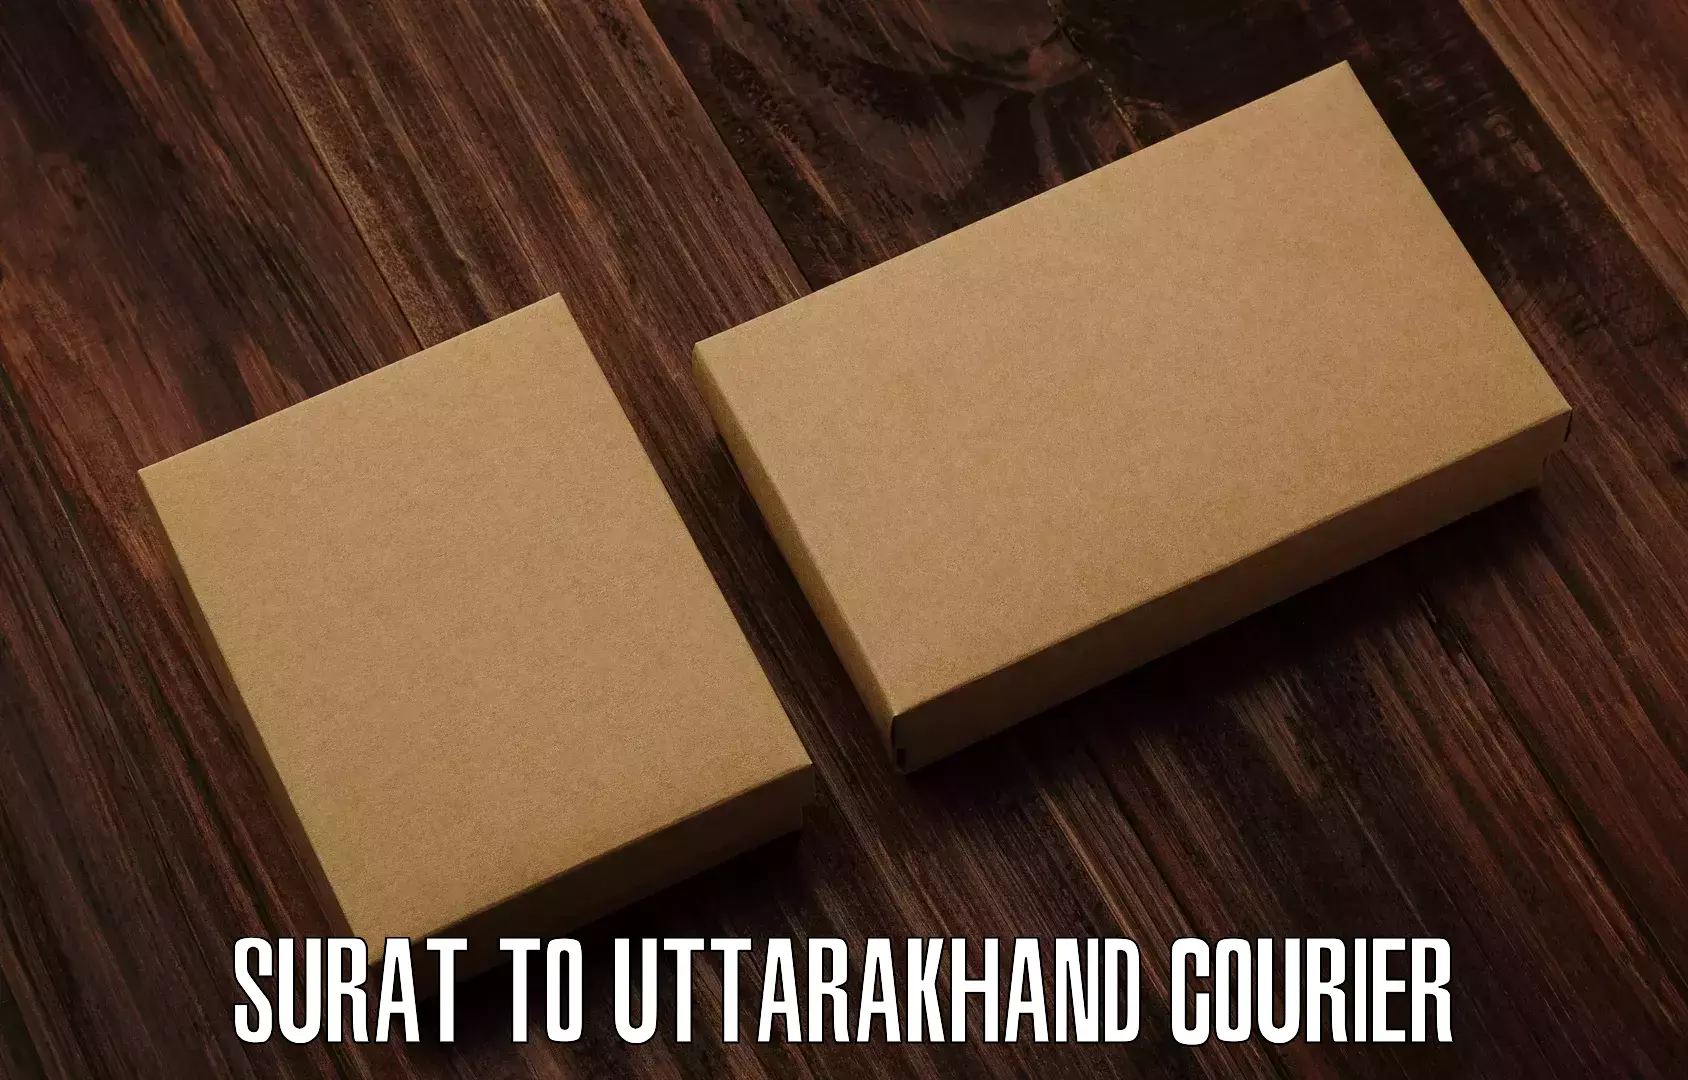 On-call courier service Surat to Uttarakhand